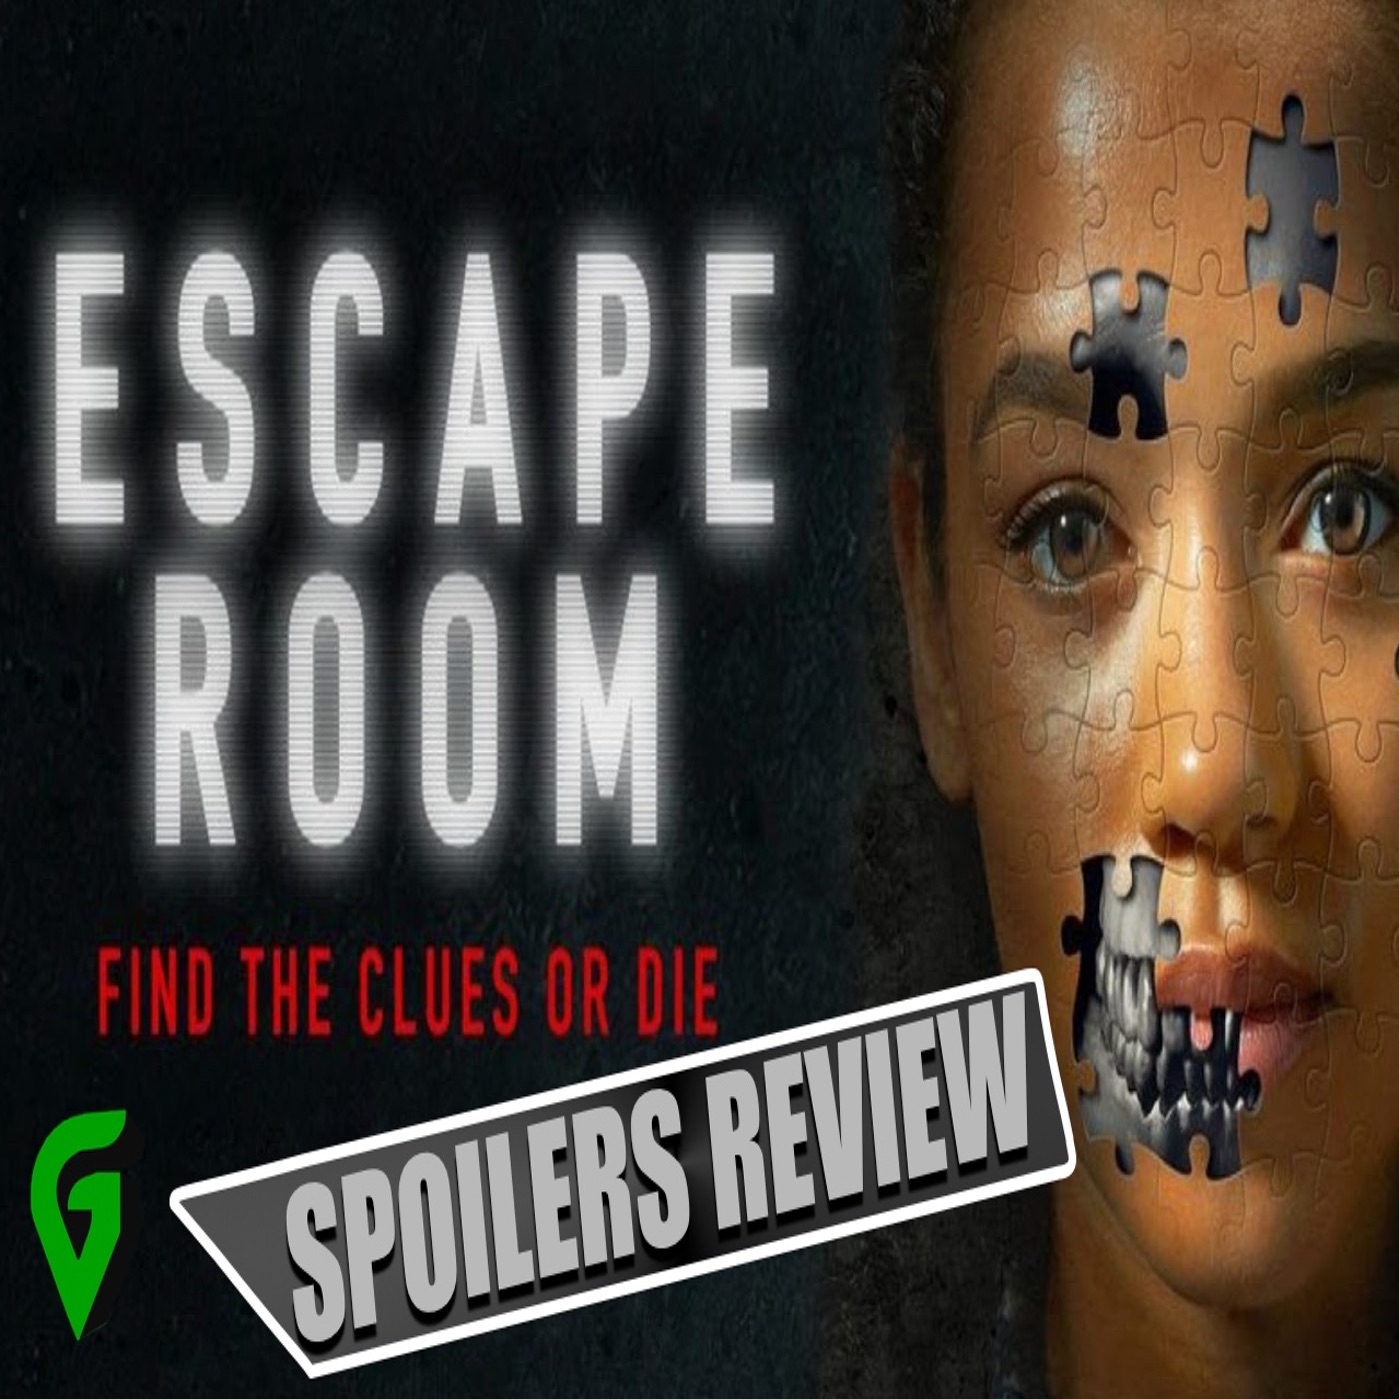 Escape Room Review/Spoilers Discussion